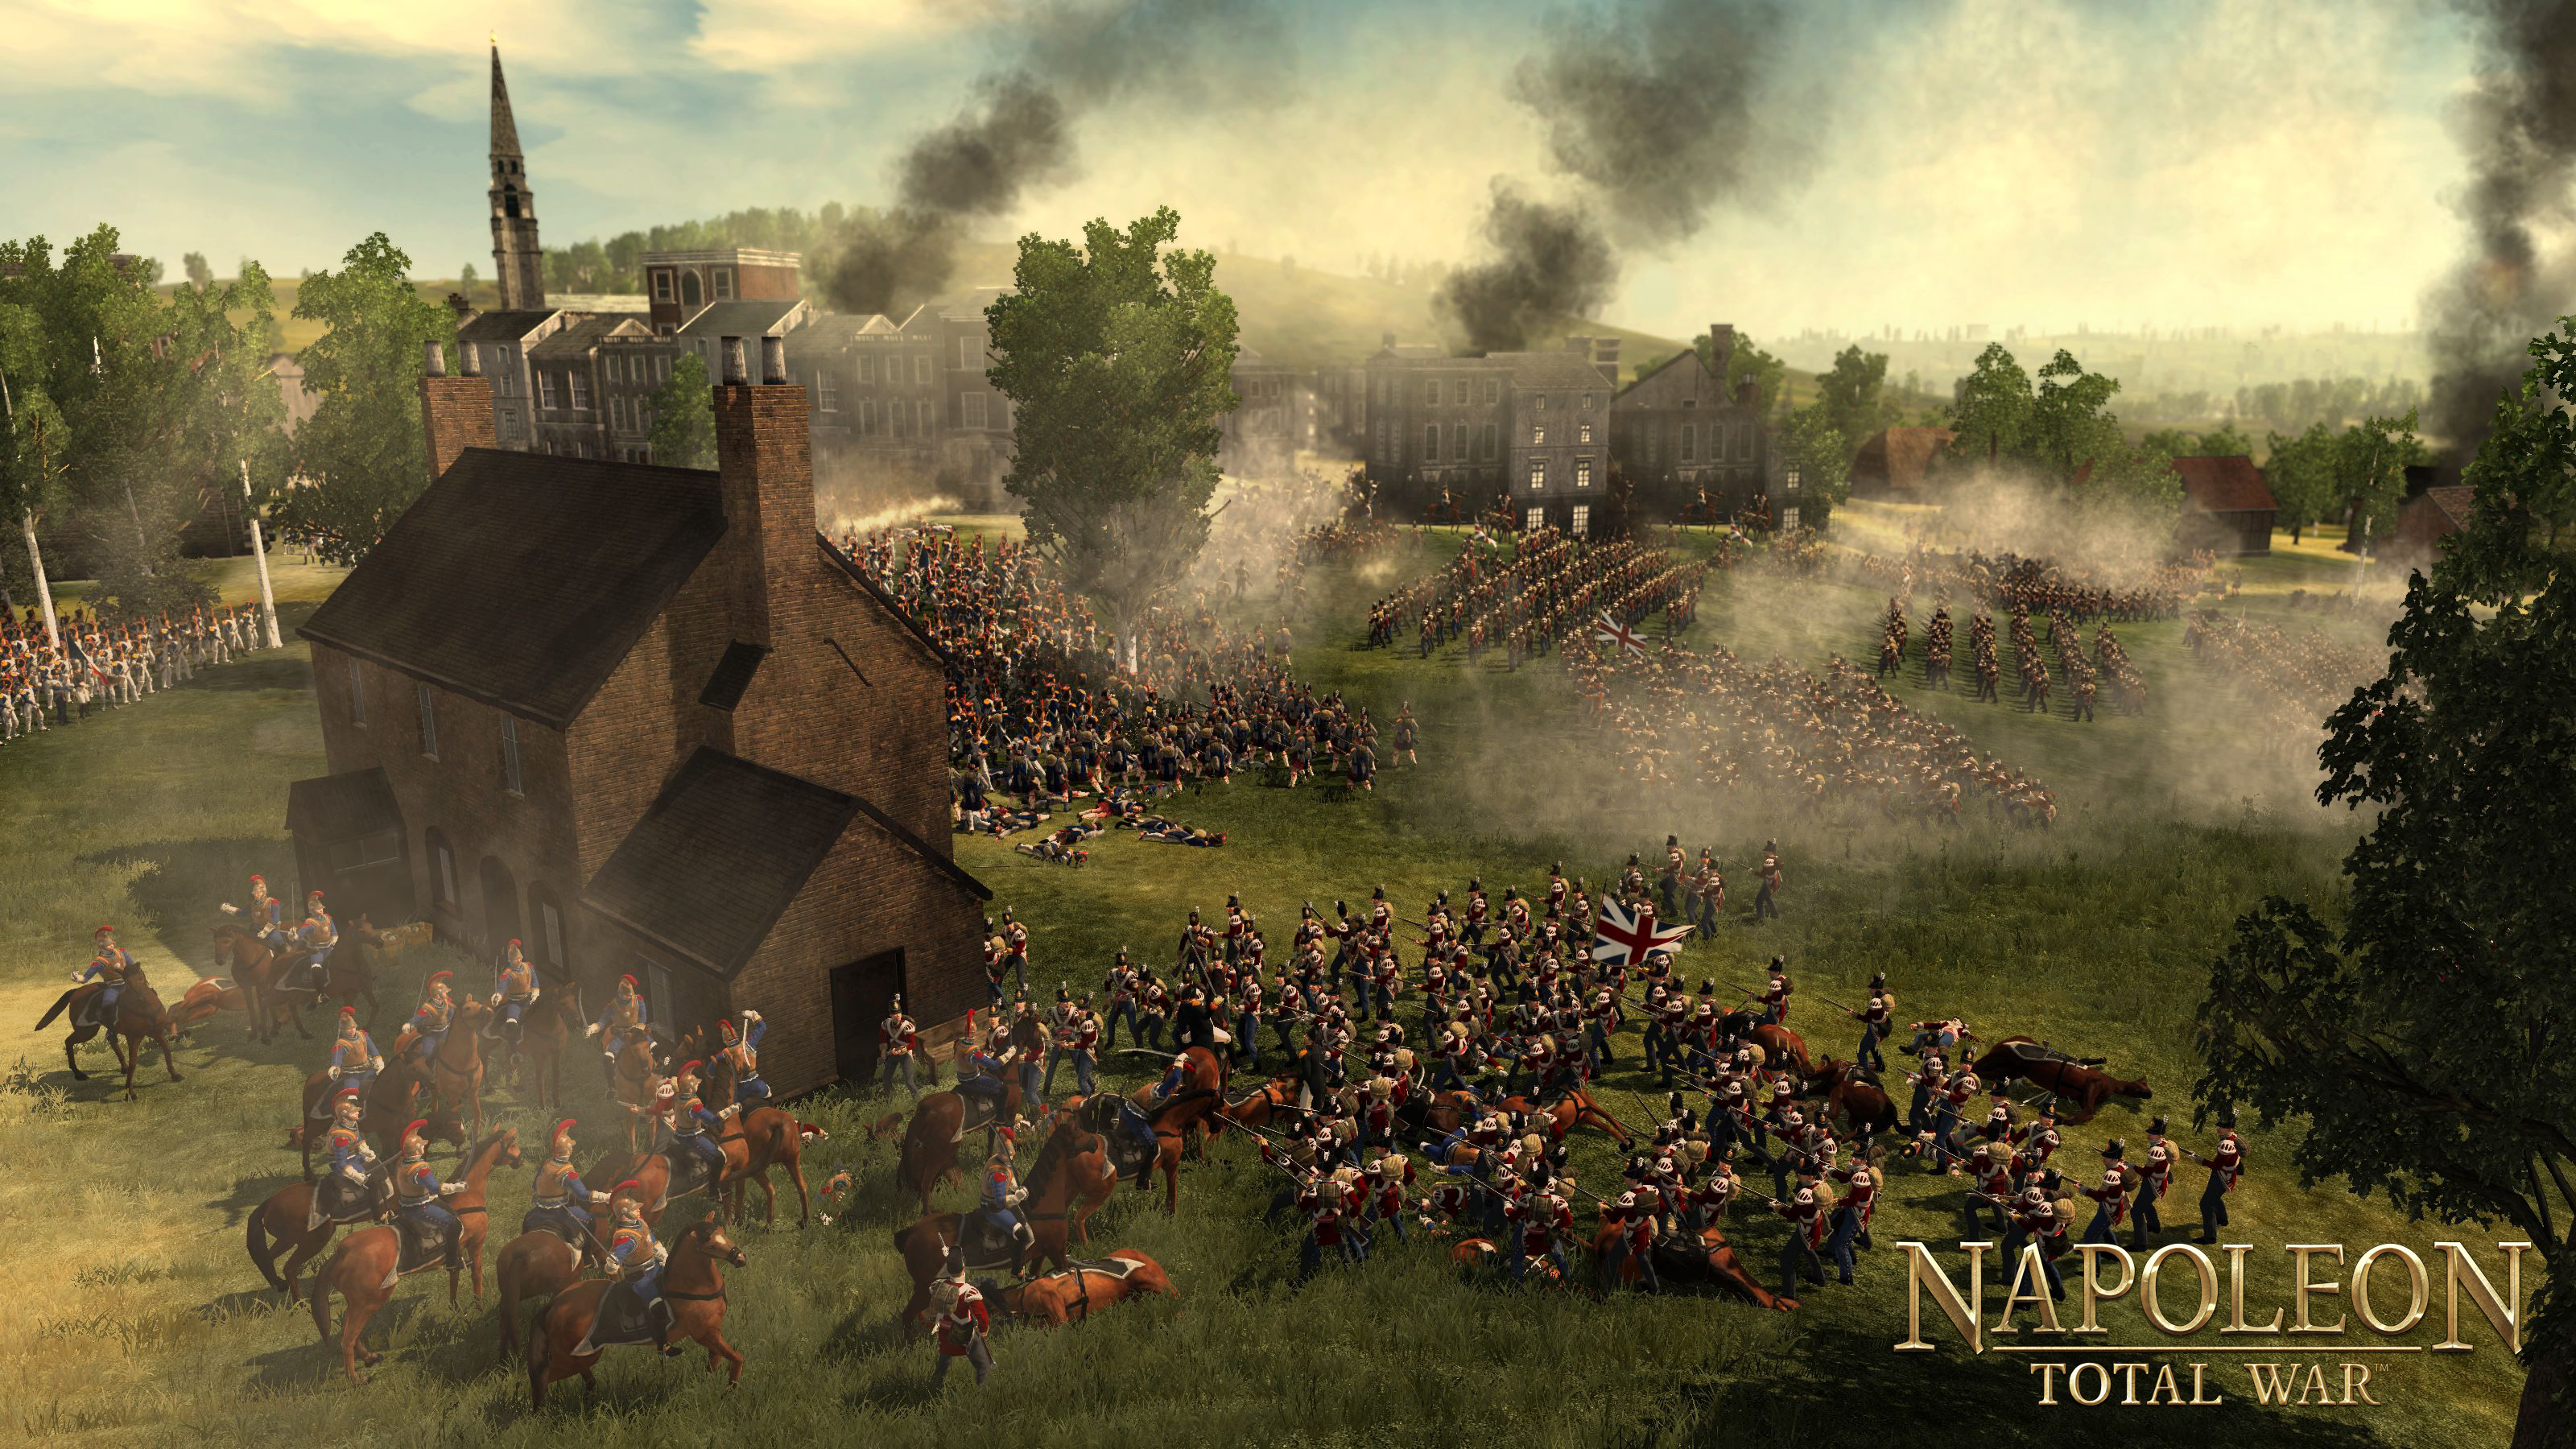 Napoleon: Total War Pics, Video Game Collection